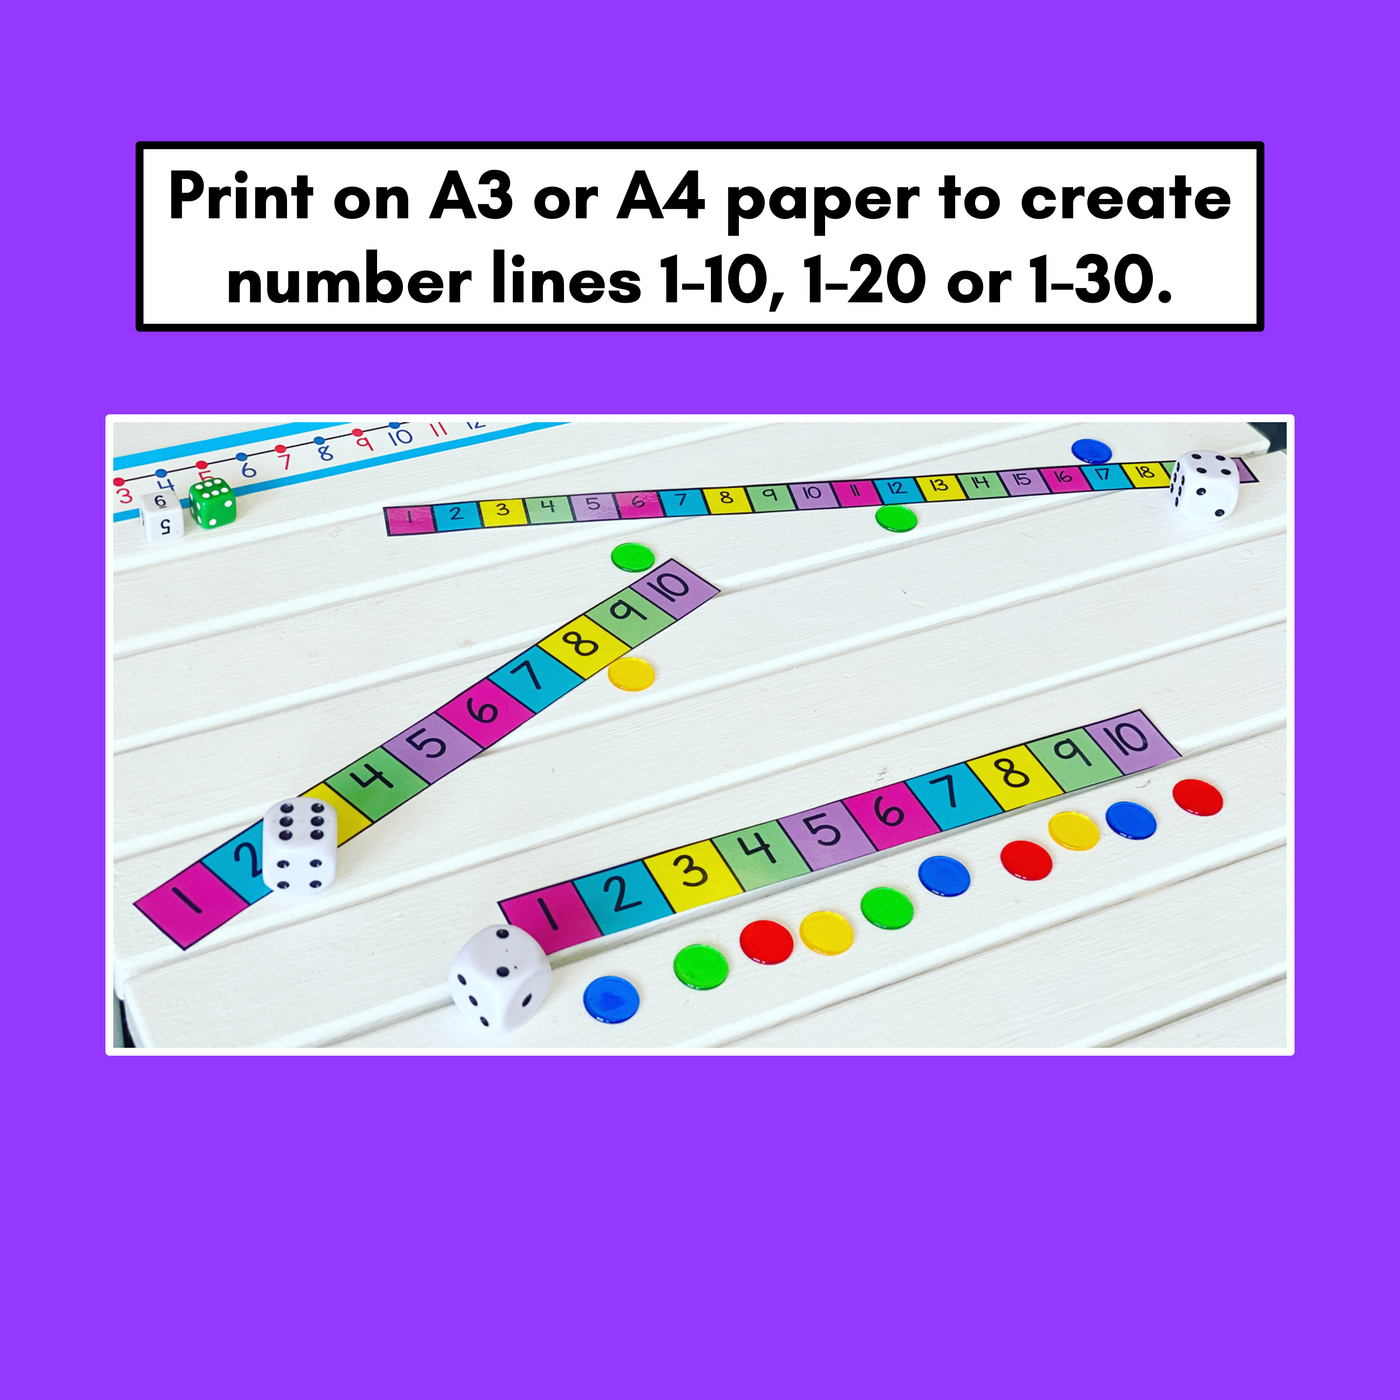 Number Line Templates - Number Lines for 1-10, 1-20 and 1-30